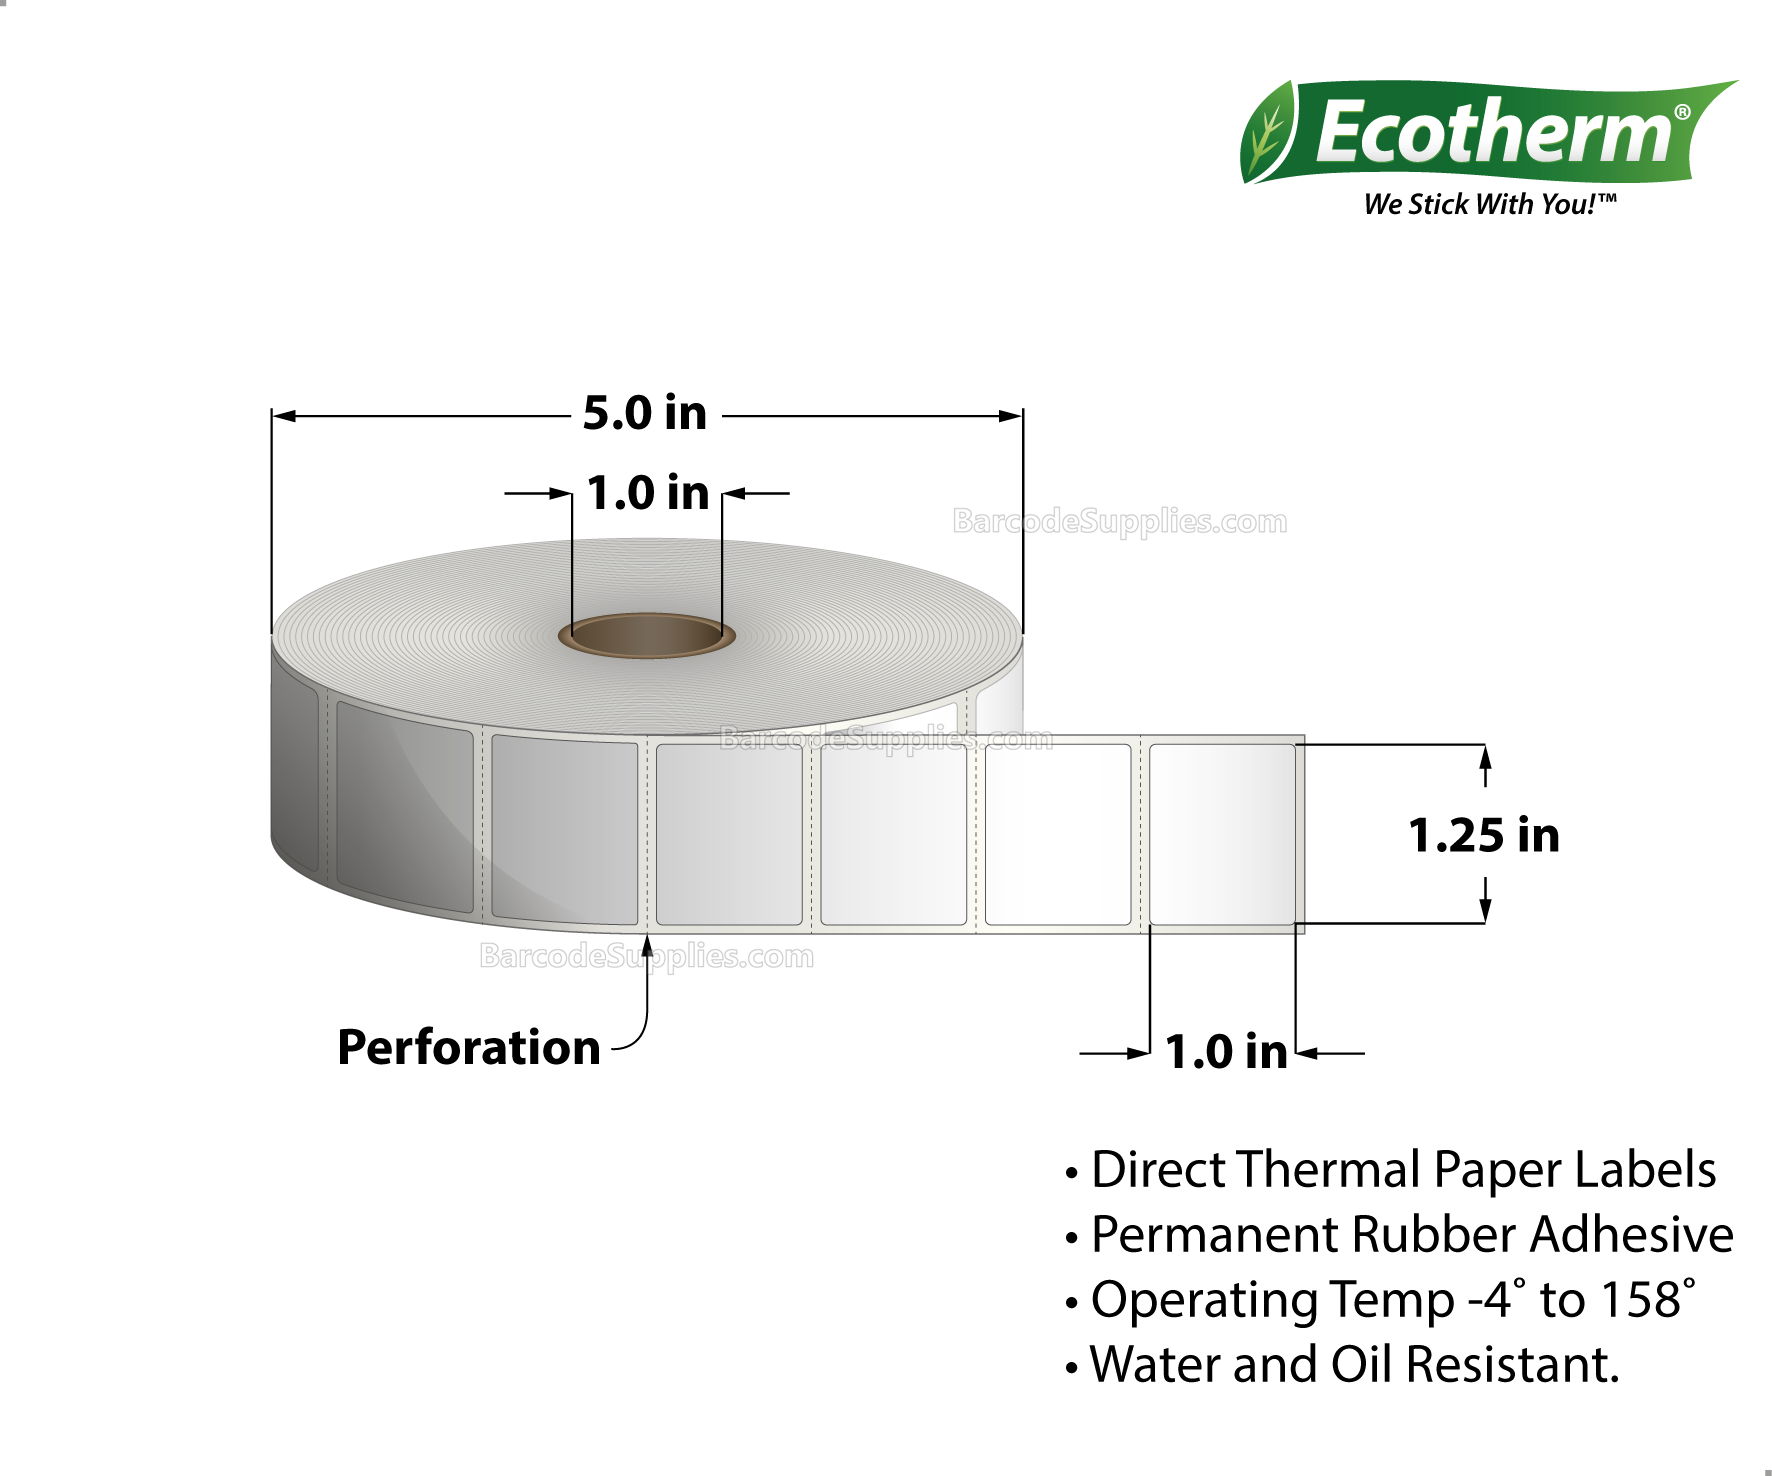 1.25 x 1 Direct Thermal White Labels With Rubber Adhesive - Perforated - 2340 Labels Per Roll - Carton Of 6 Rolls - 14040 Labels Total - MPN: ECOTHERM15114-6